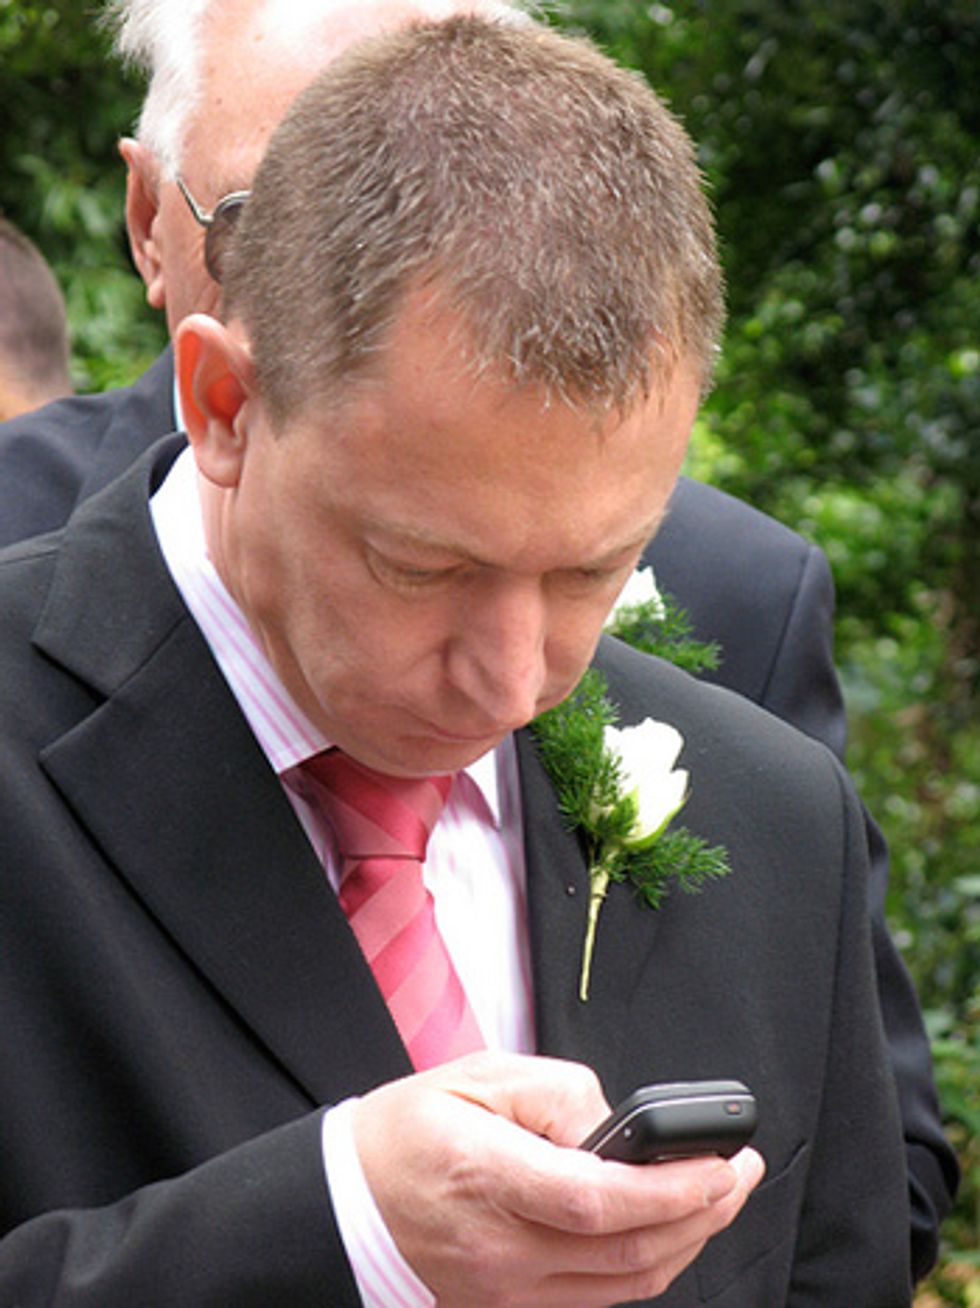 Wedding RX: How Do I Tell My Wedding Guests To Lay Off The Tech Toys?